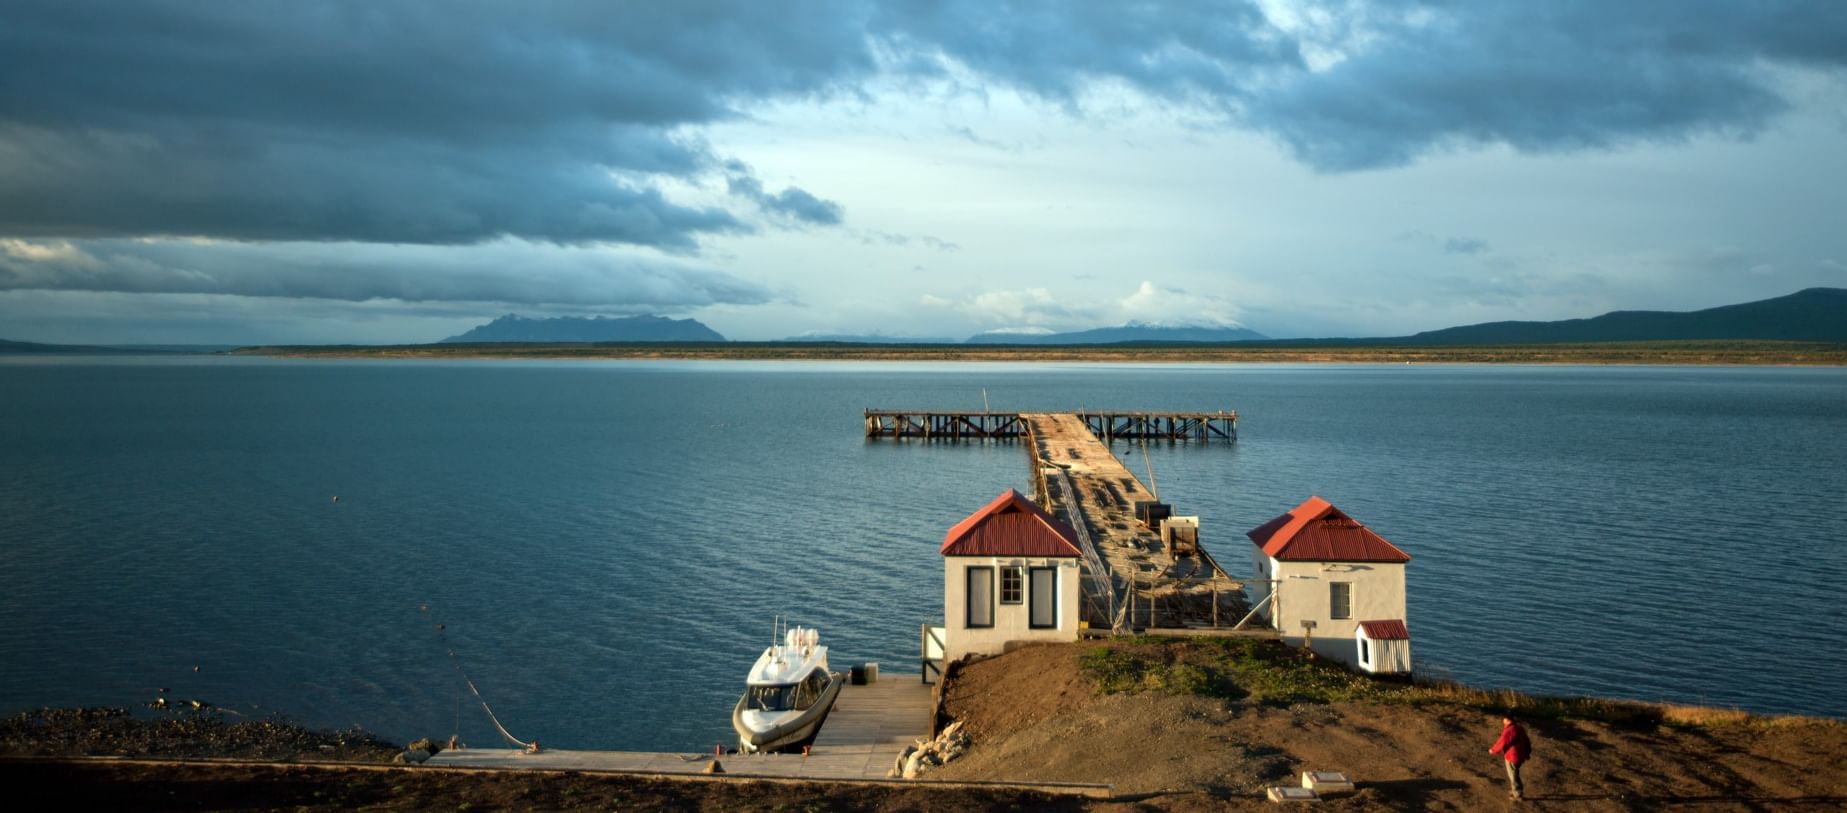 Distance view on Pier at The Singular Patagonia